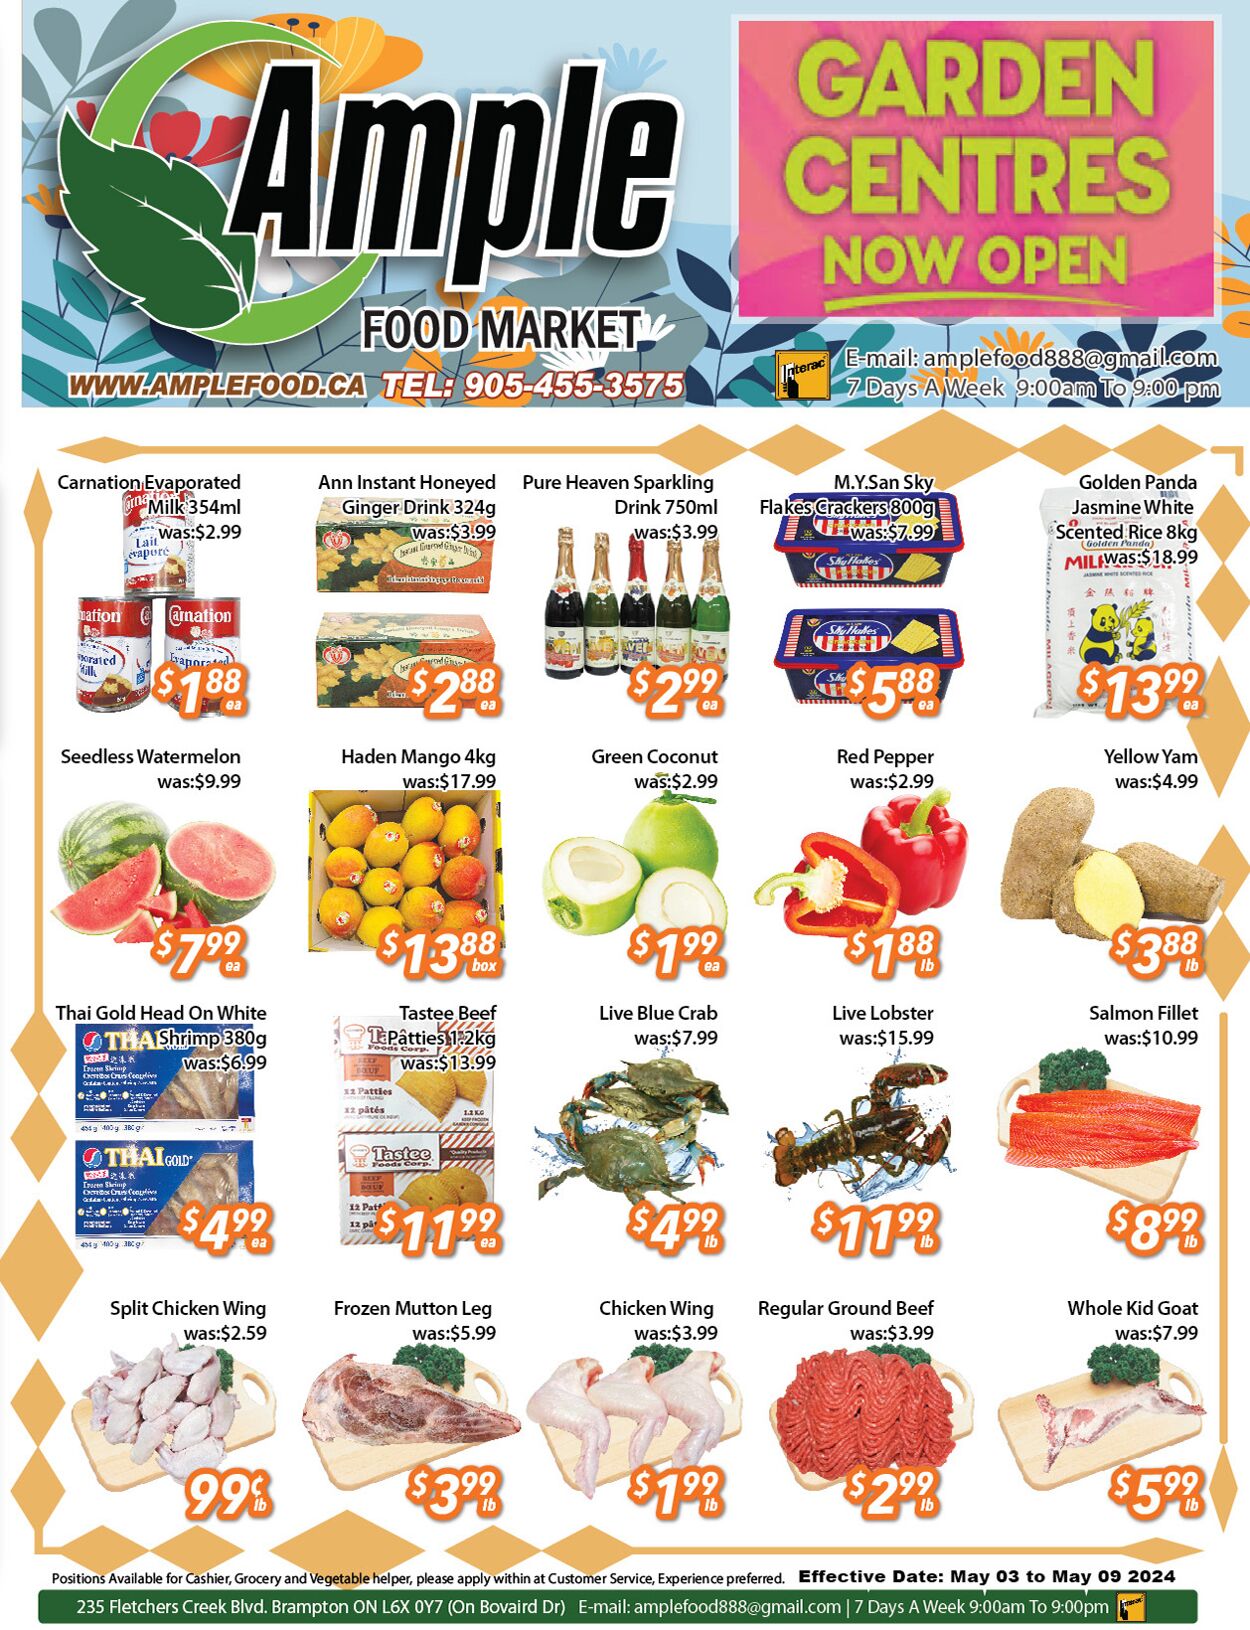 Ample Food Market Promotional flyers